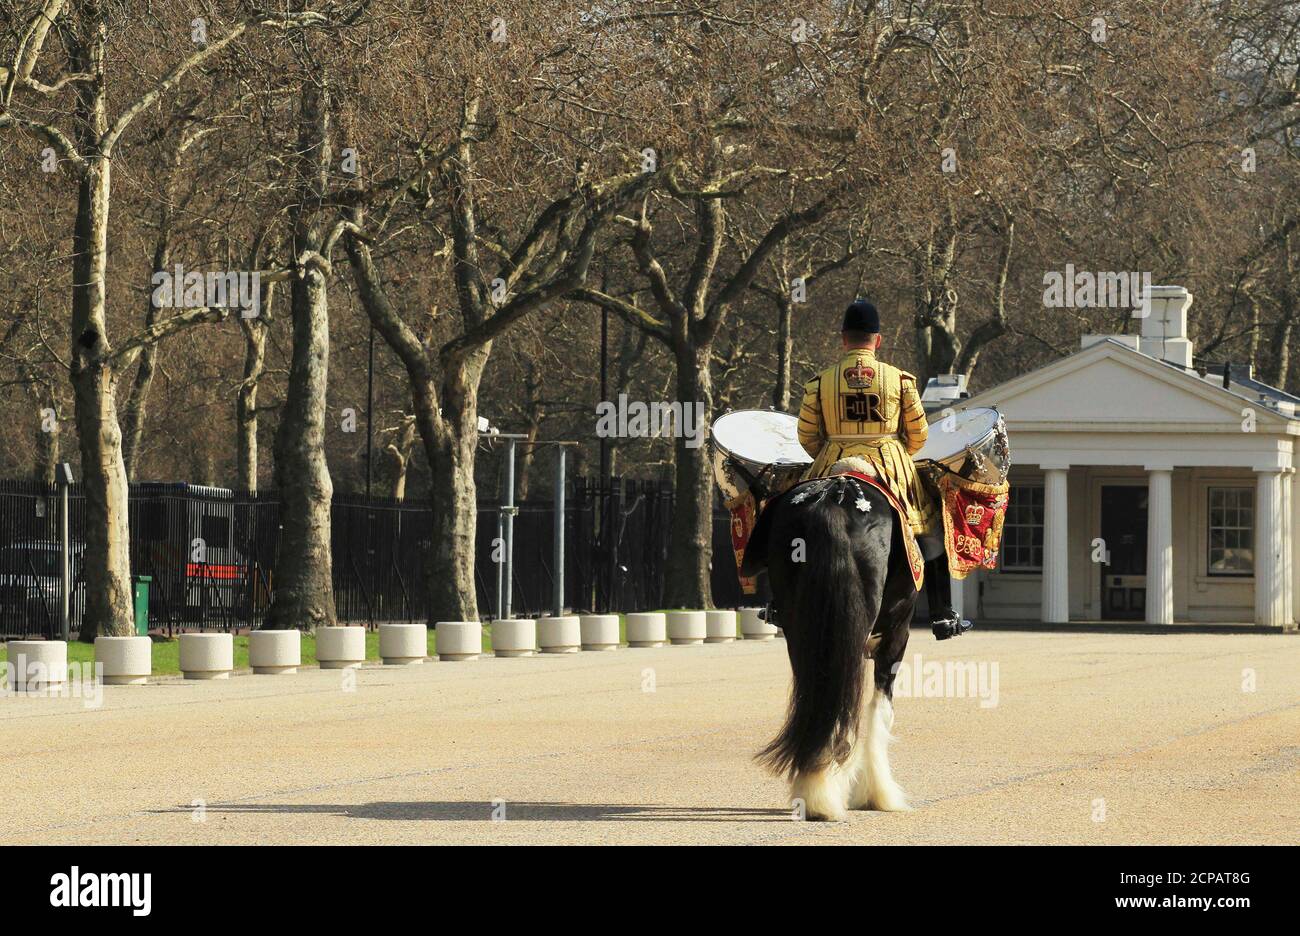 The drum horse of the Household Cavalry Mounted Regiment leaves the parade ground during a media viewing at Wellington Barracks showing uniforms that will be worn for the Queen's Diamond Jubilee celebrations, London March 21, 2012. Photograph taken March 21, 2012.  REUTERS/Olivia Harris (BRITAIN - Tags: SOCIETY ROYALS MILITARY ENTERTAINMENT) Stock Photo